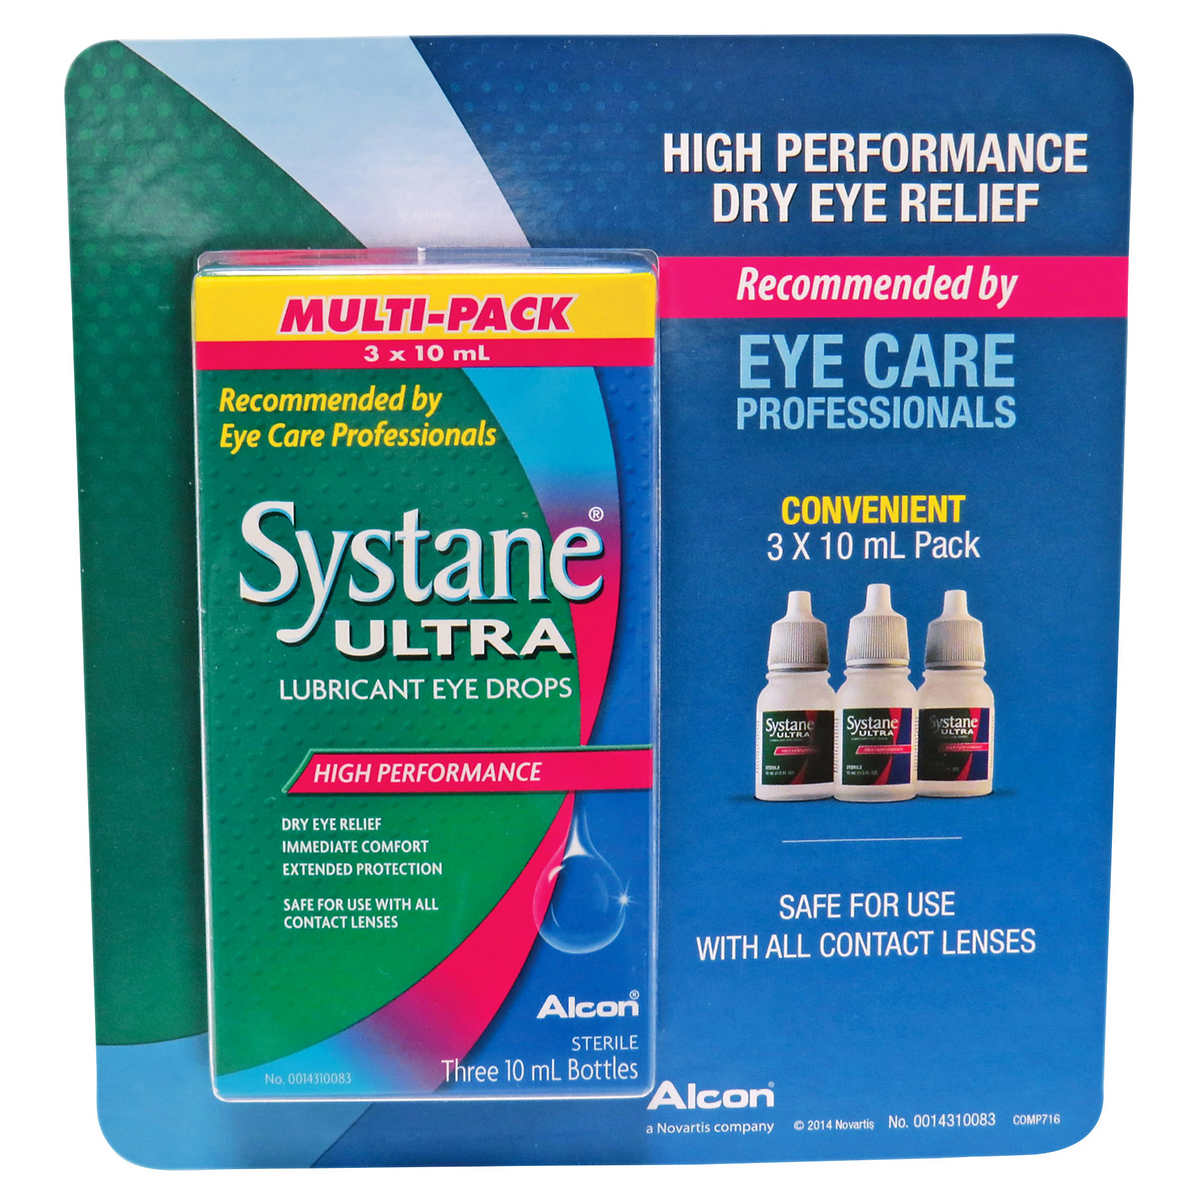 NEW: HYLO DUAL INTENSE™  The NEW Gold Standard in Dry Eye